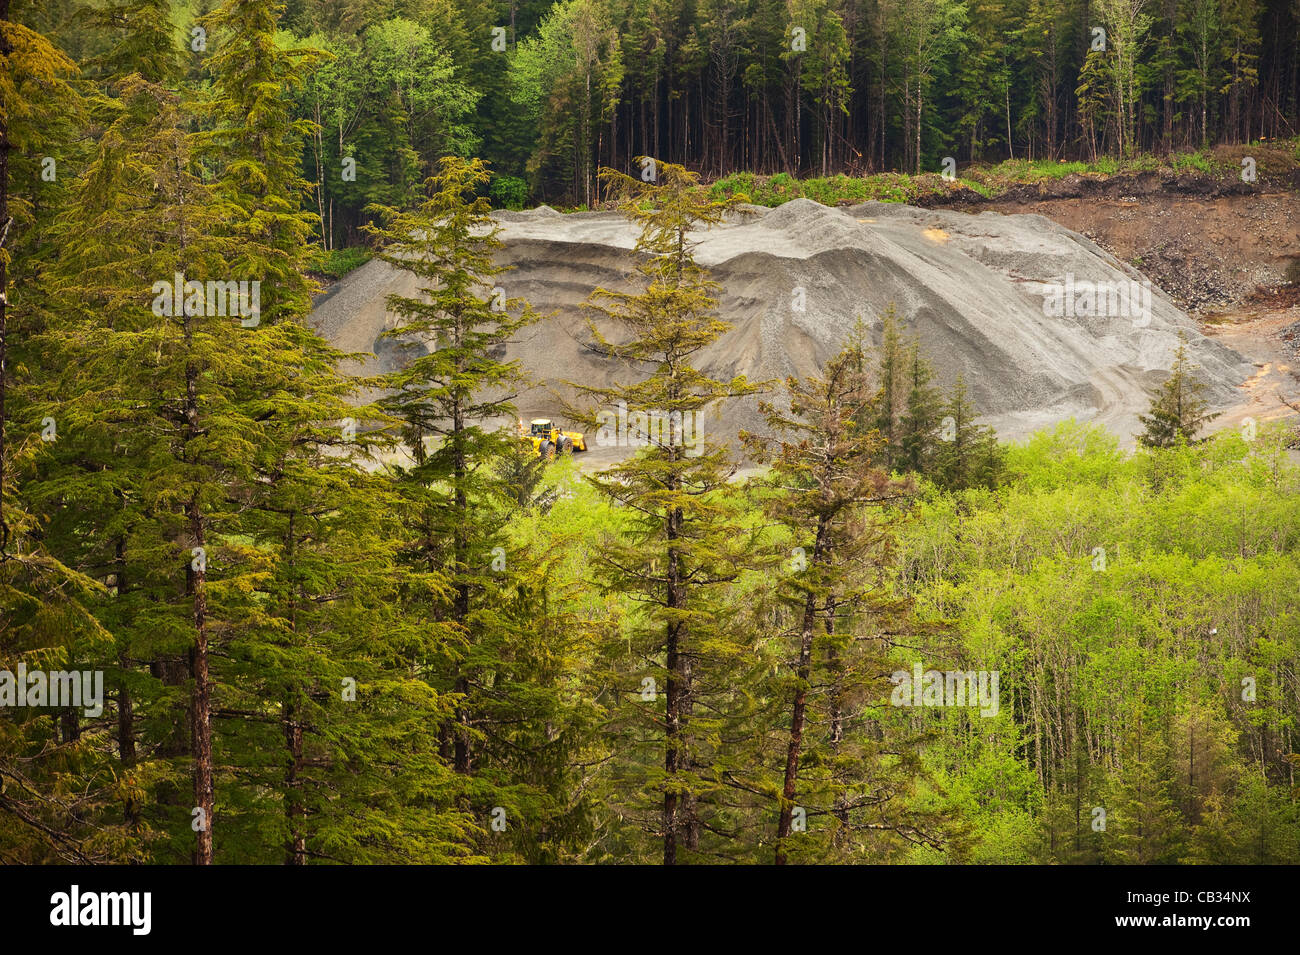 Sitka, Alaska 27 May 2012  Machinery in rock quarry at the edge of rain forest in southeast Alaska. Stock Photo